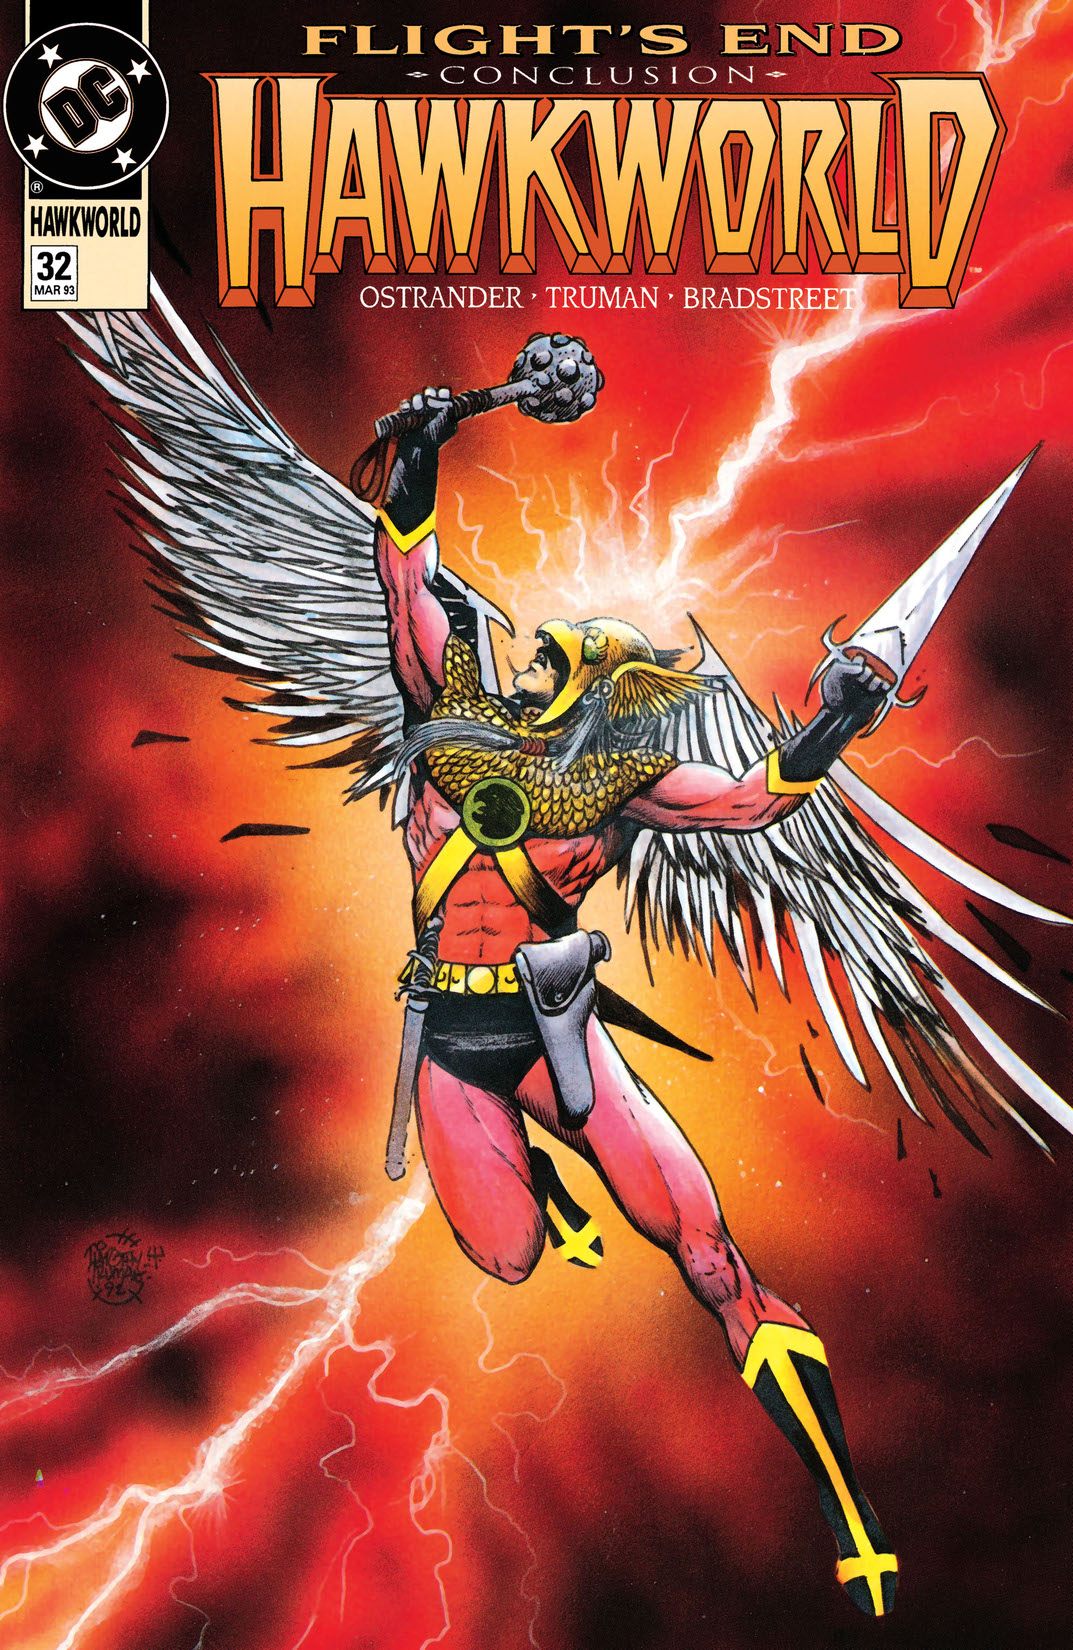 Hawkworld (1989-) #32 preview images